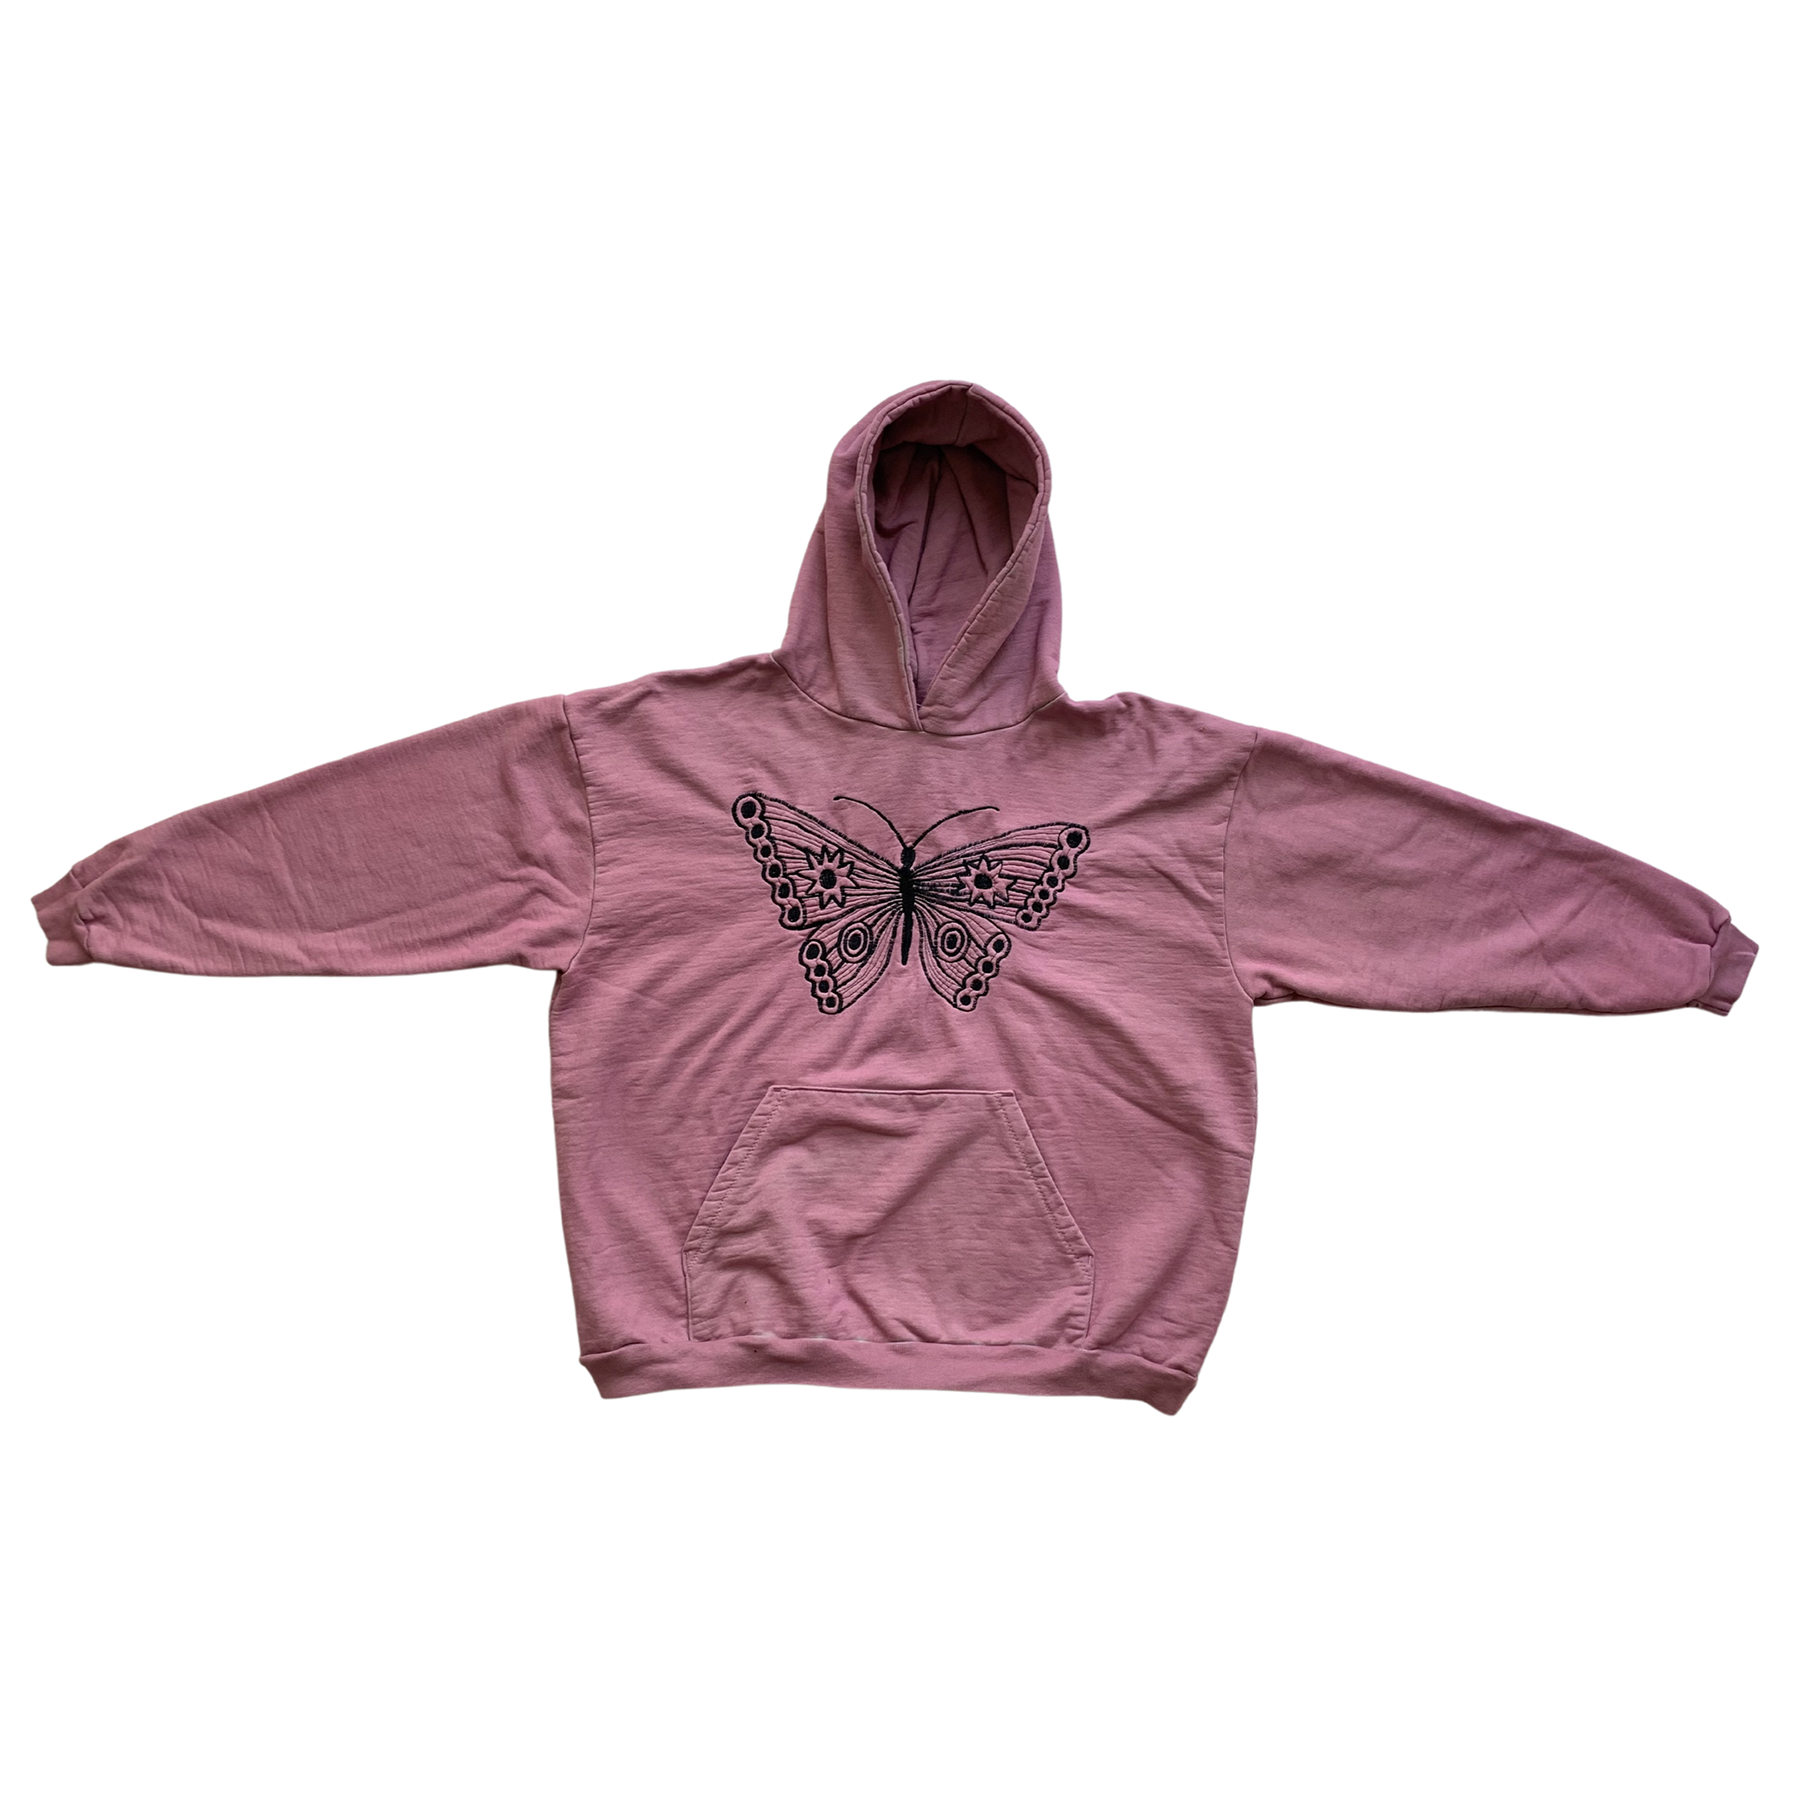 heavy fleece hoodie- organic usa cotton - garment dyed and embroidered - 3X